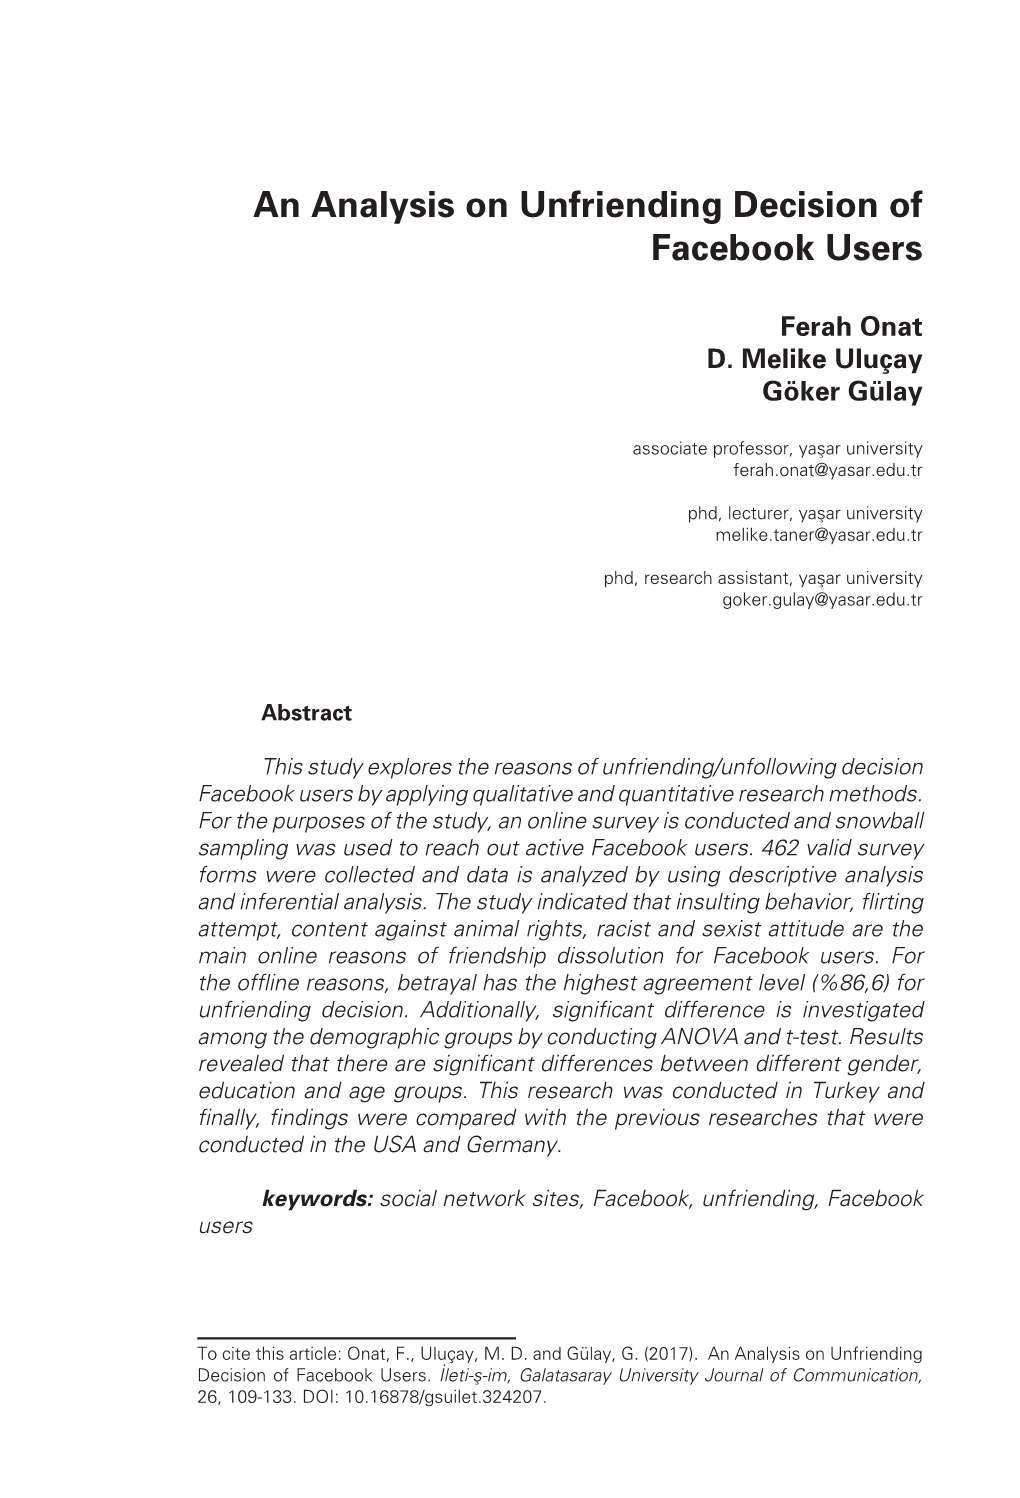 An Analysis on Unfriending Decision of Facebook Users